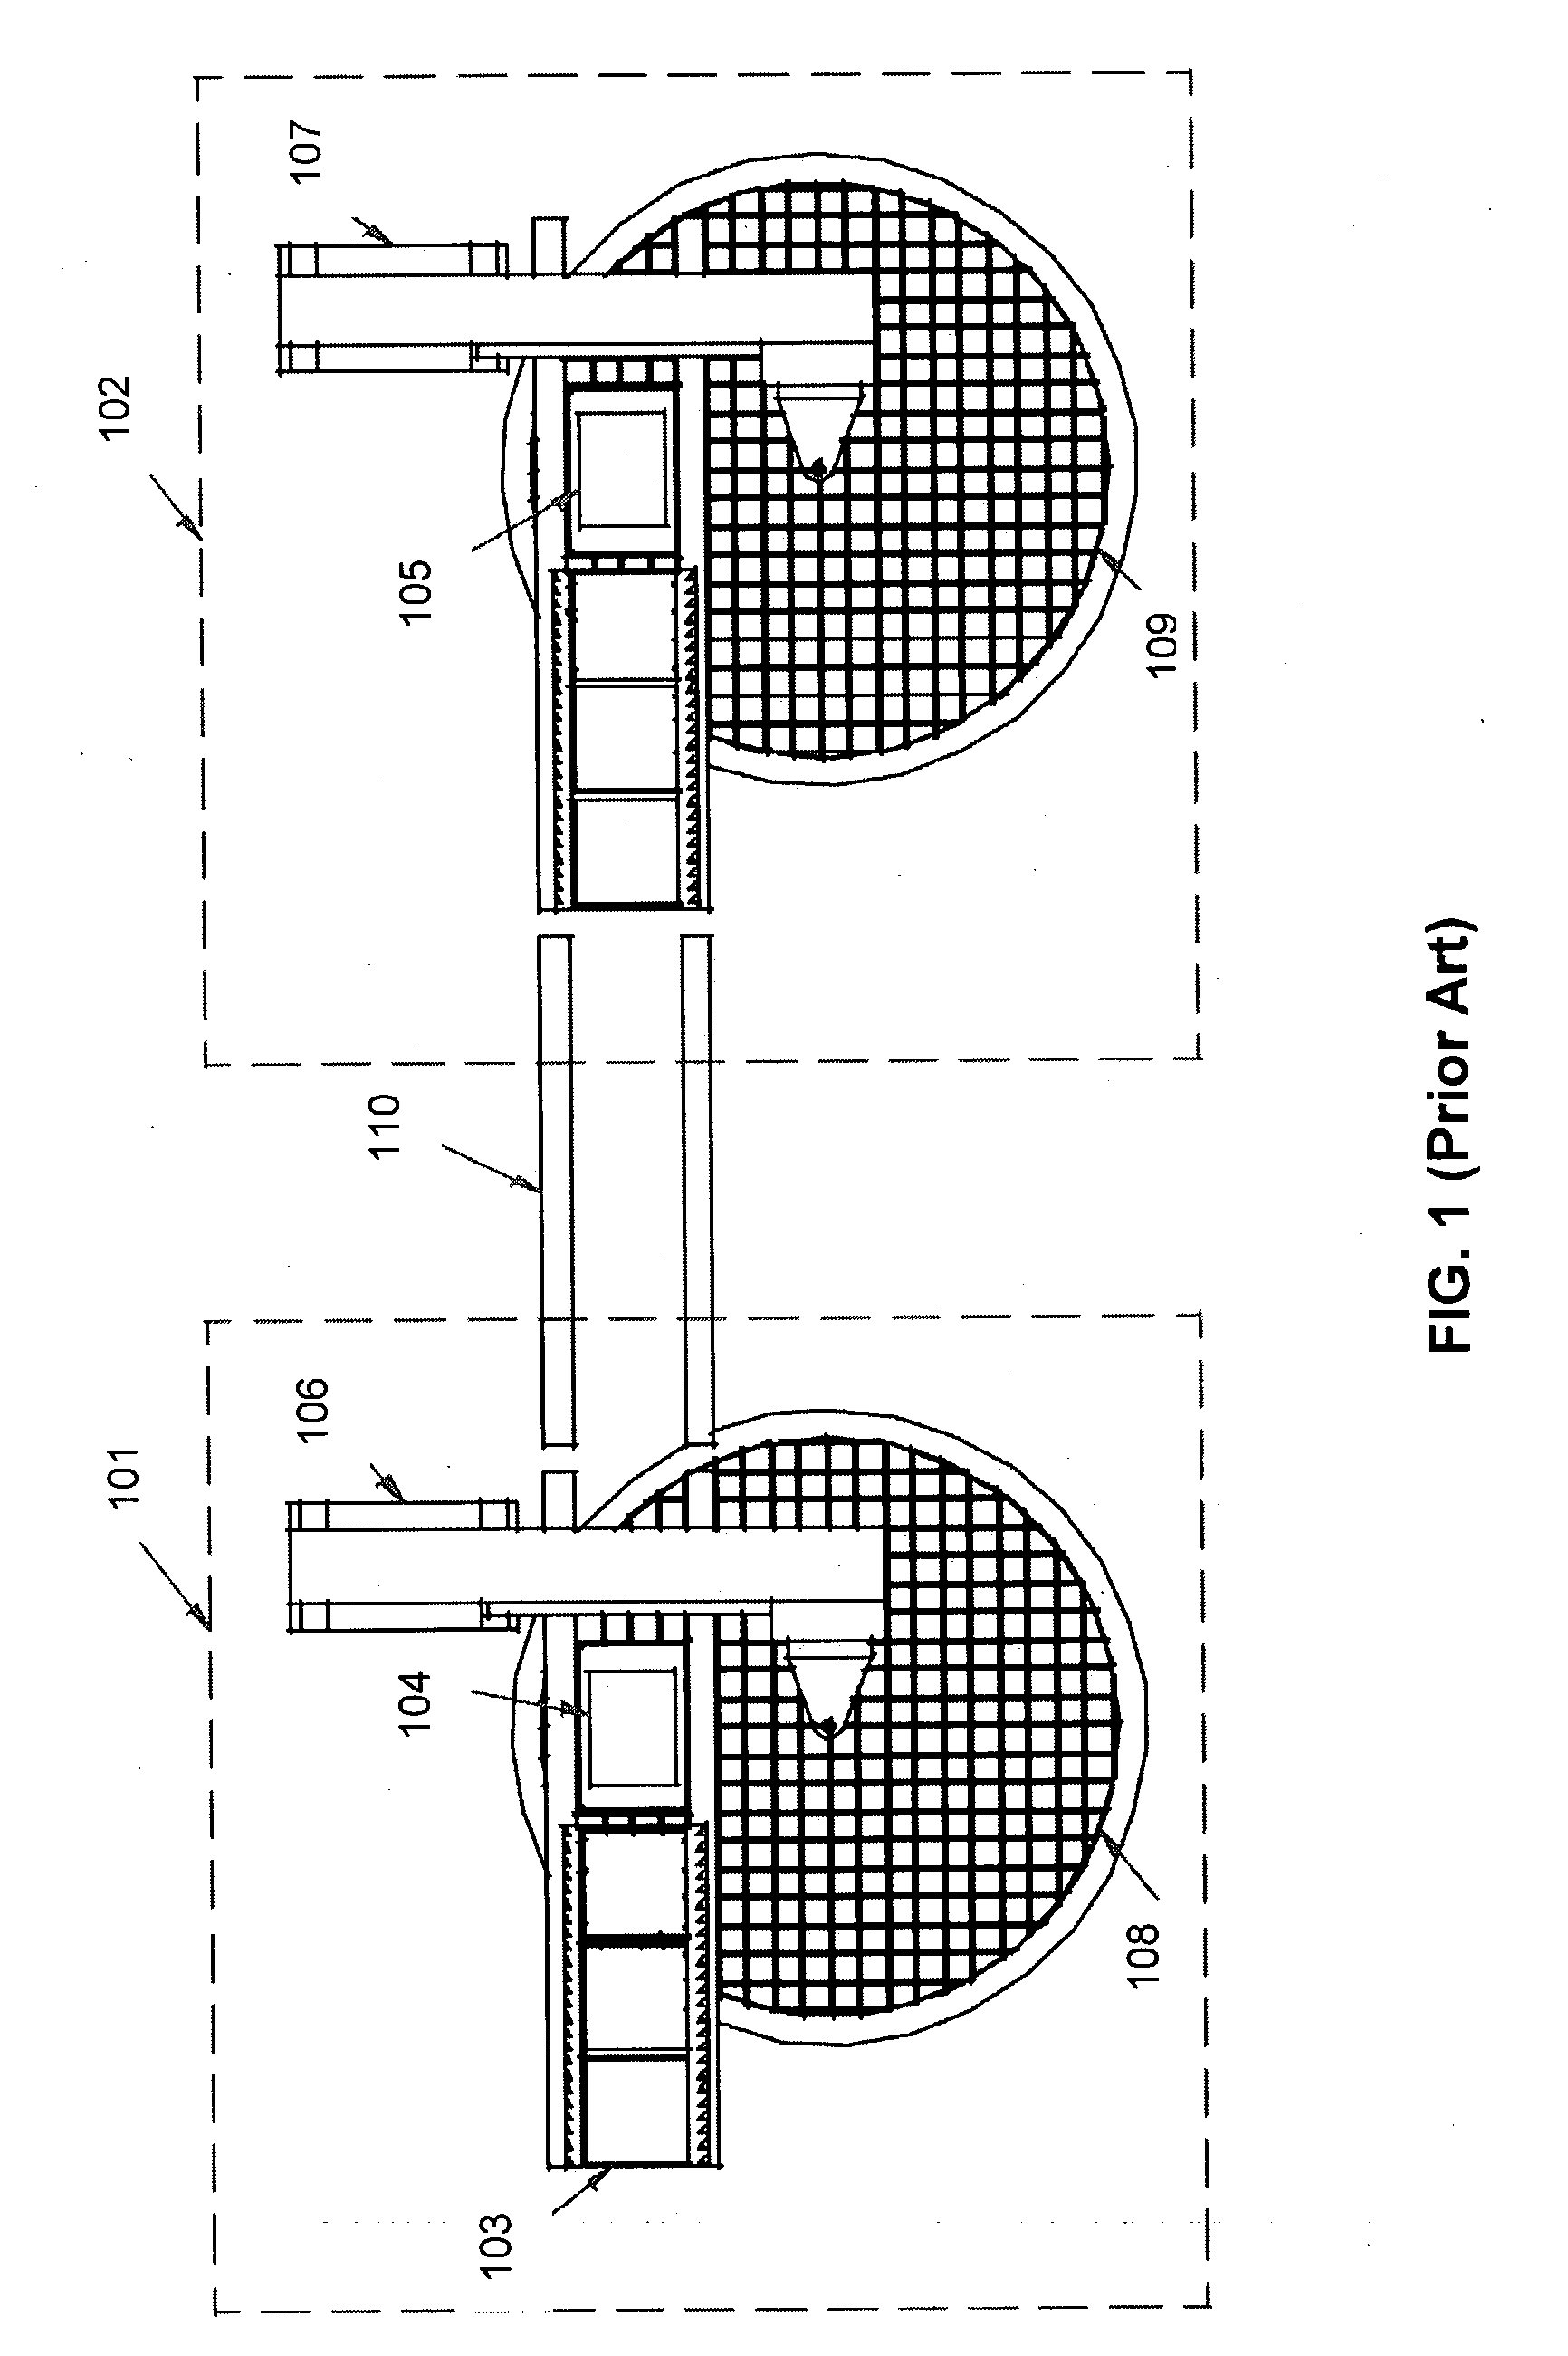 Semiconductor apparatus with multiple delivery devices for components